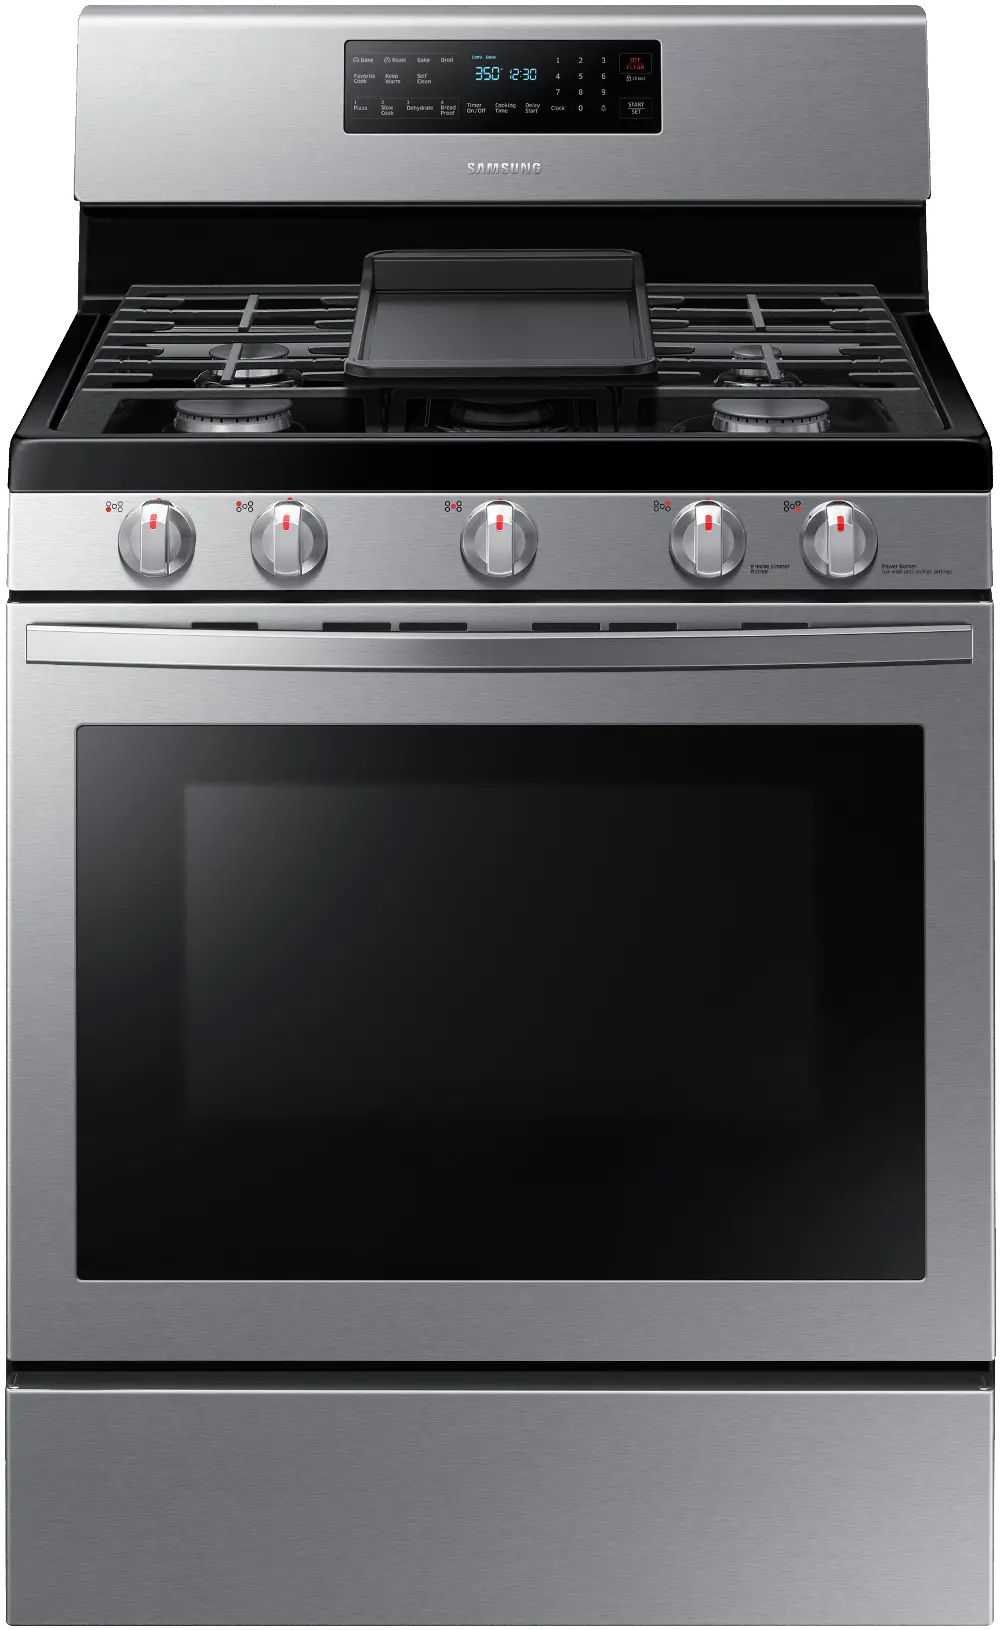 NX58T7511SS Samsung 30 Inch Gas Convection Range with Air Fry - 5.8 cu. ft., Fingerprint Resistant Stainless Steel-1